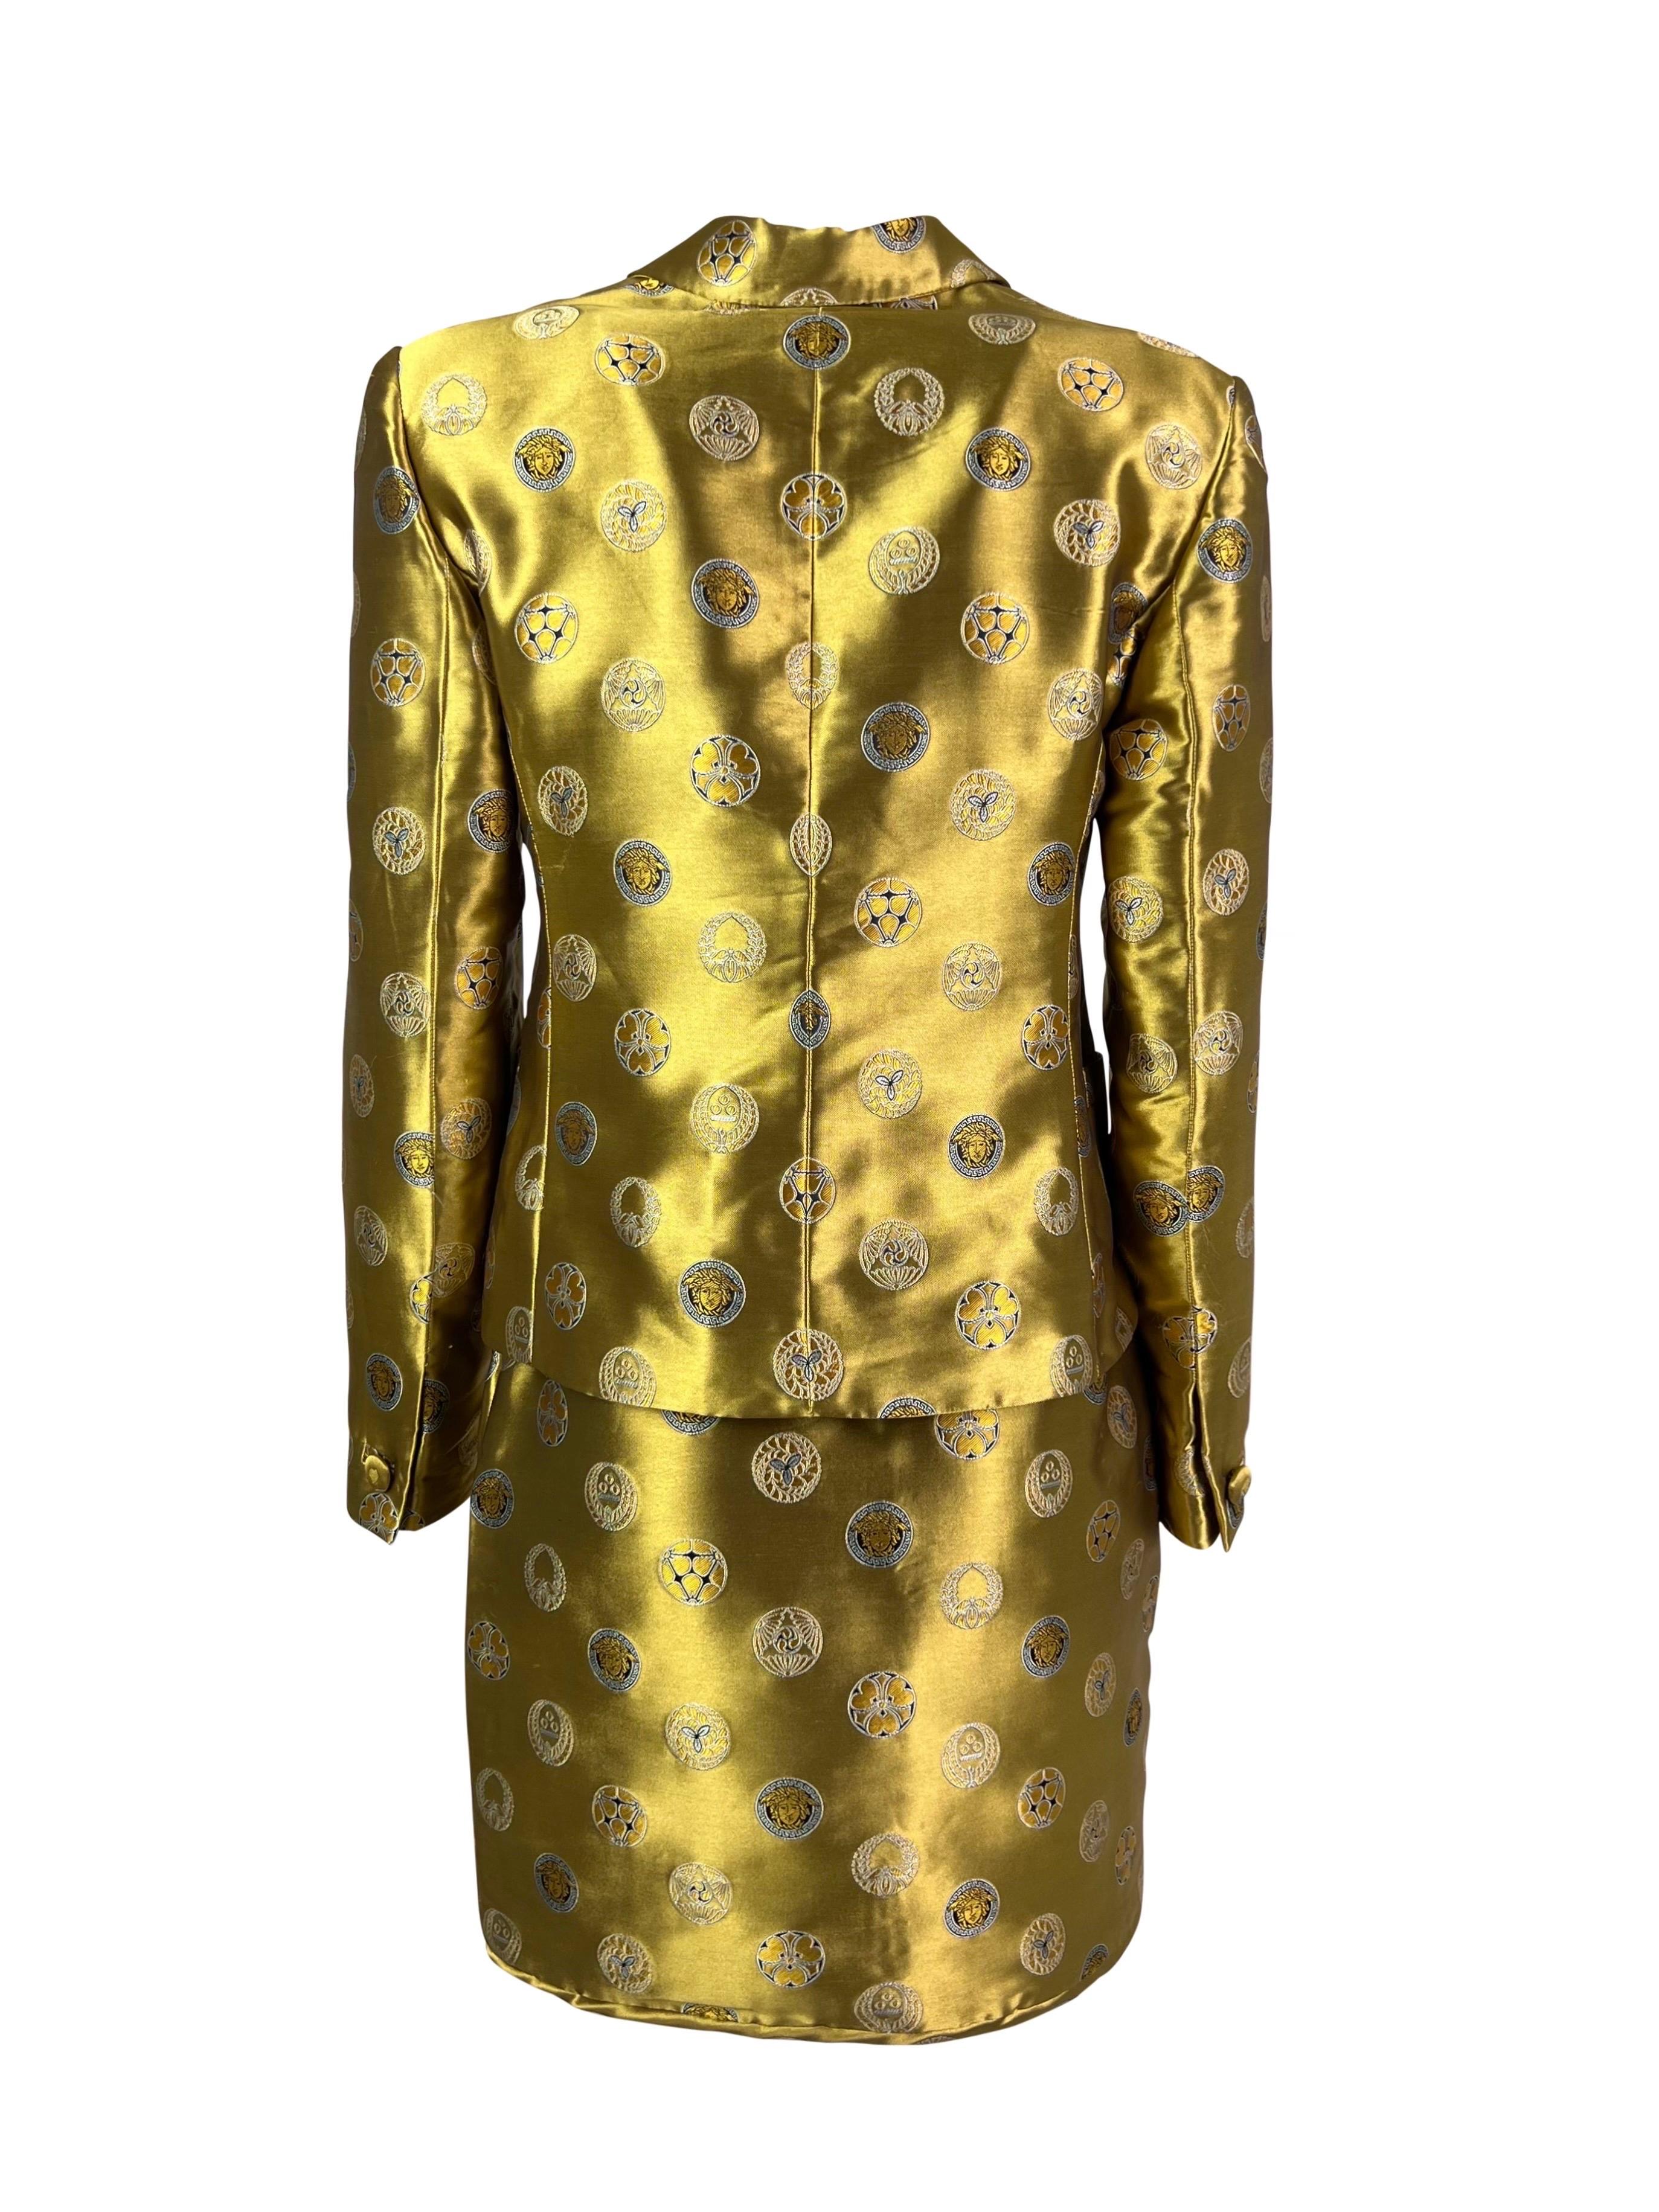 A stunning silk blend suit with a Medusa Head and Coin Print, a fitted jacket + a mini skirt. The jacket is decorated with fabulous textile buttons with Medusa Head hardware. 

Size IT 40, fits like Small.

Measurements (flat lay on one